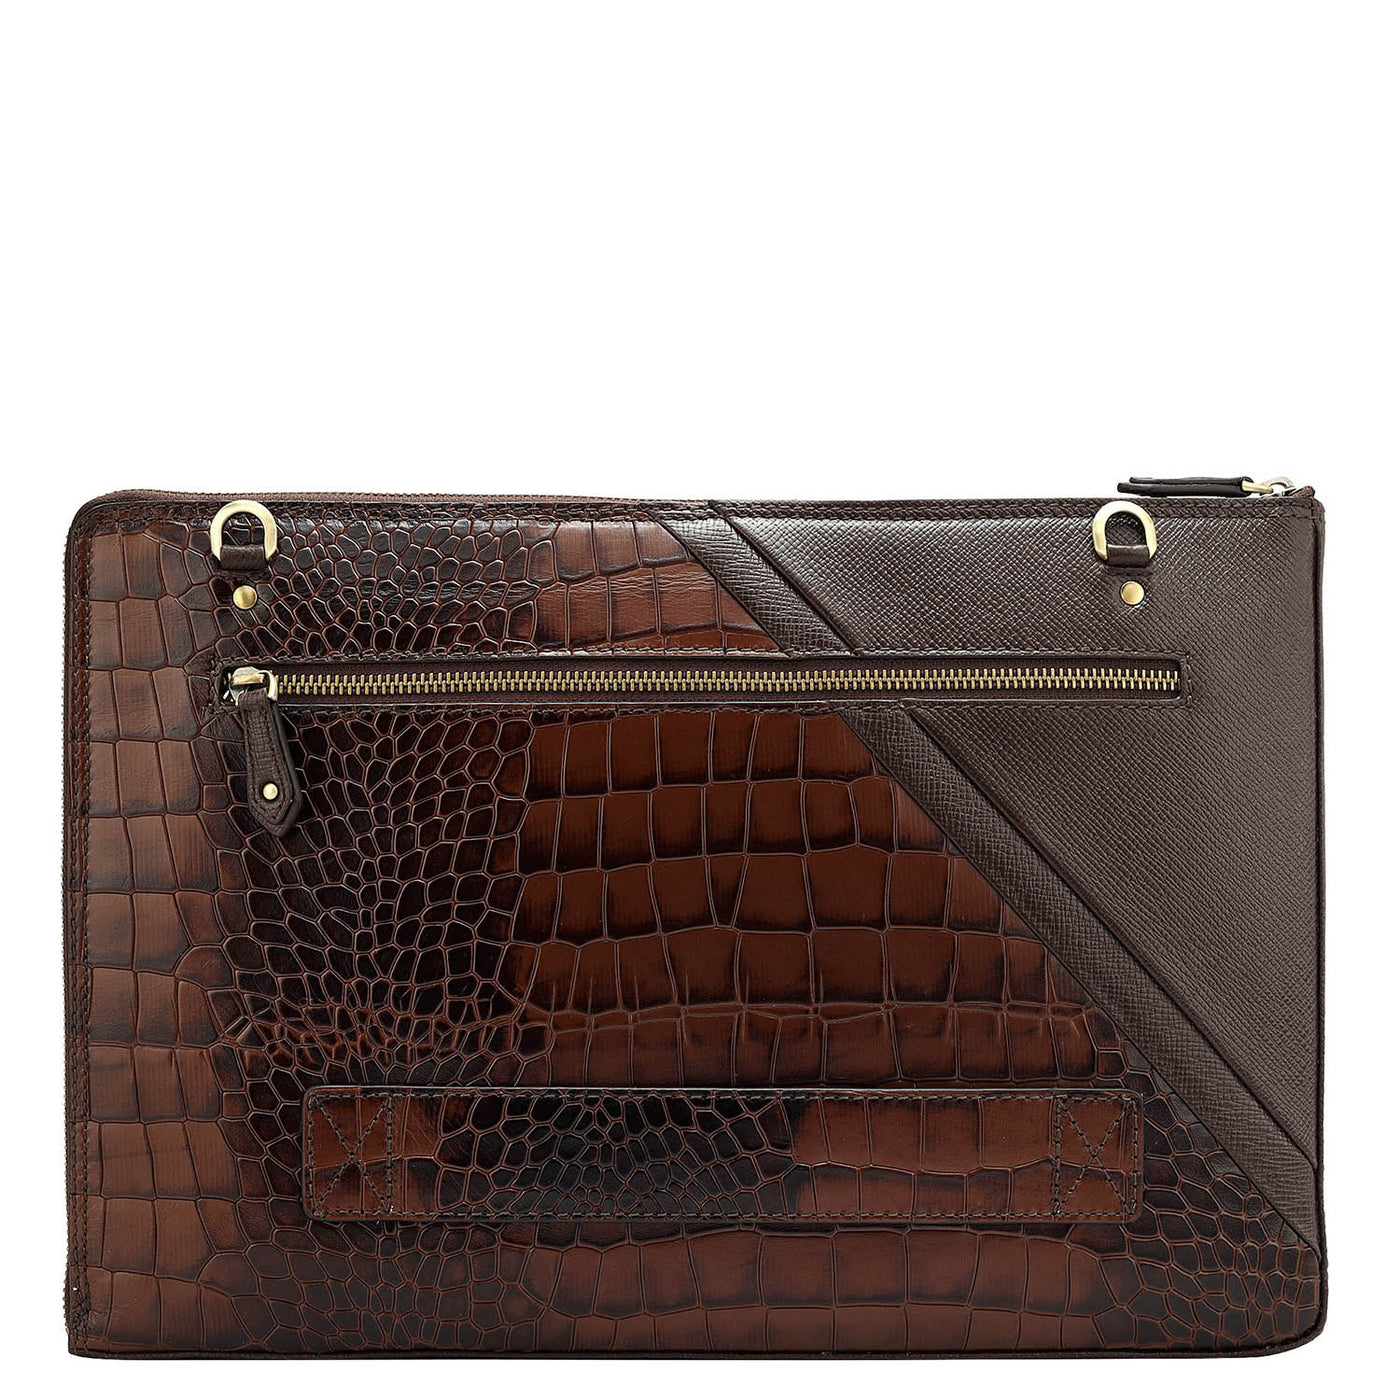 Brown Croco Franzy Leather Computer Sleeve - Upto 15"